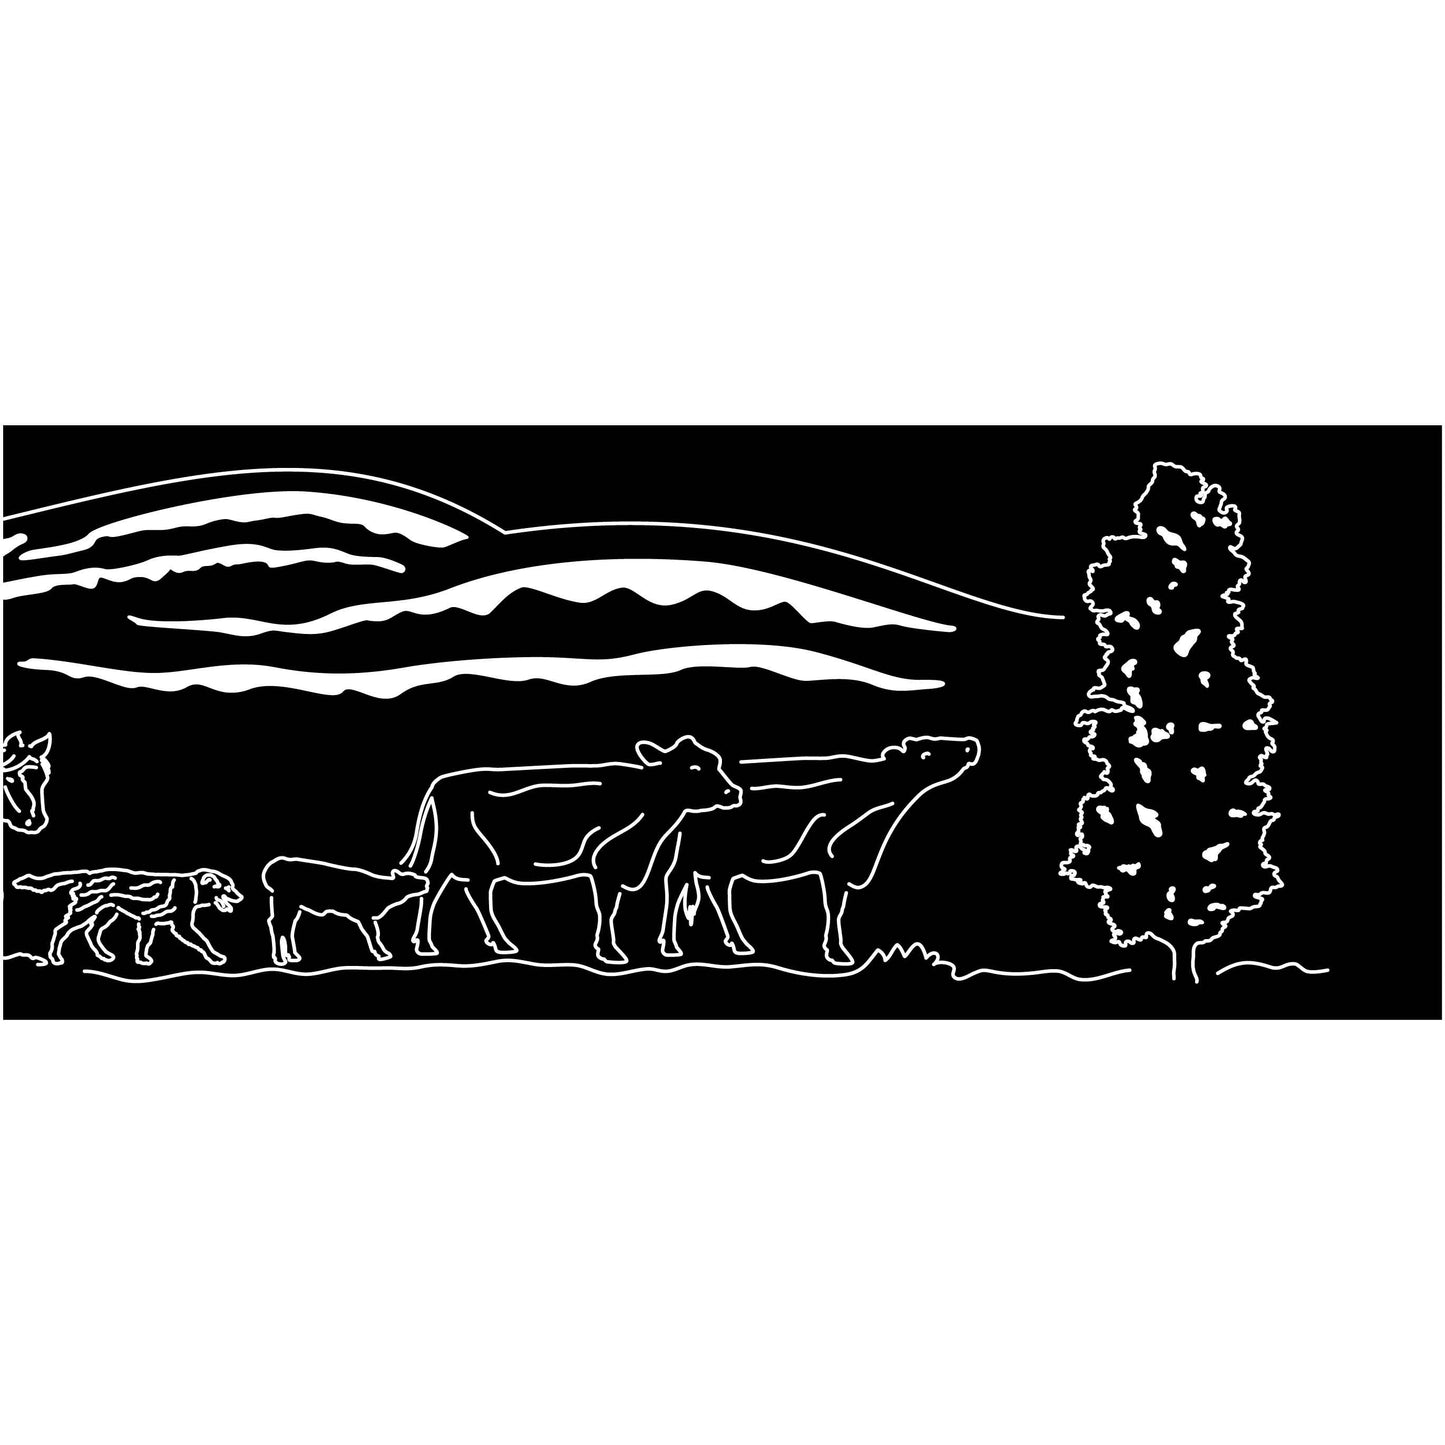 Fire pit Cowboy, Windmill, Hills, Cows, and poplar trees Scene-dxf files